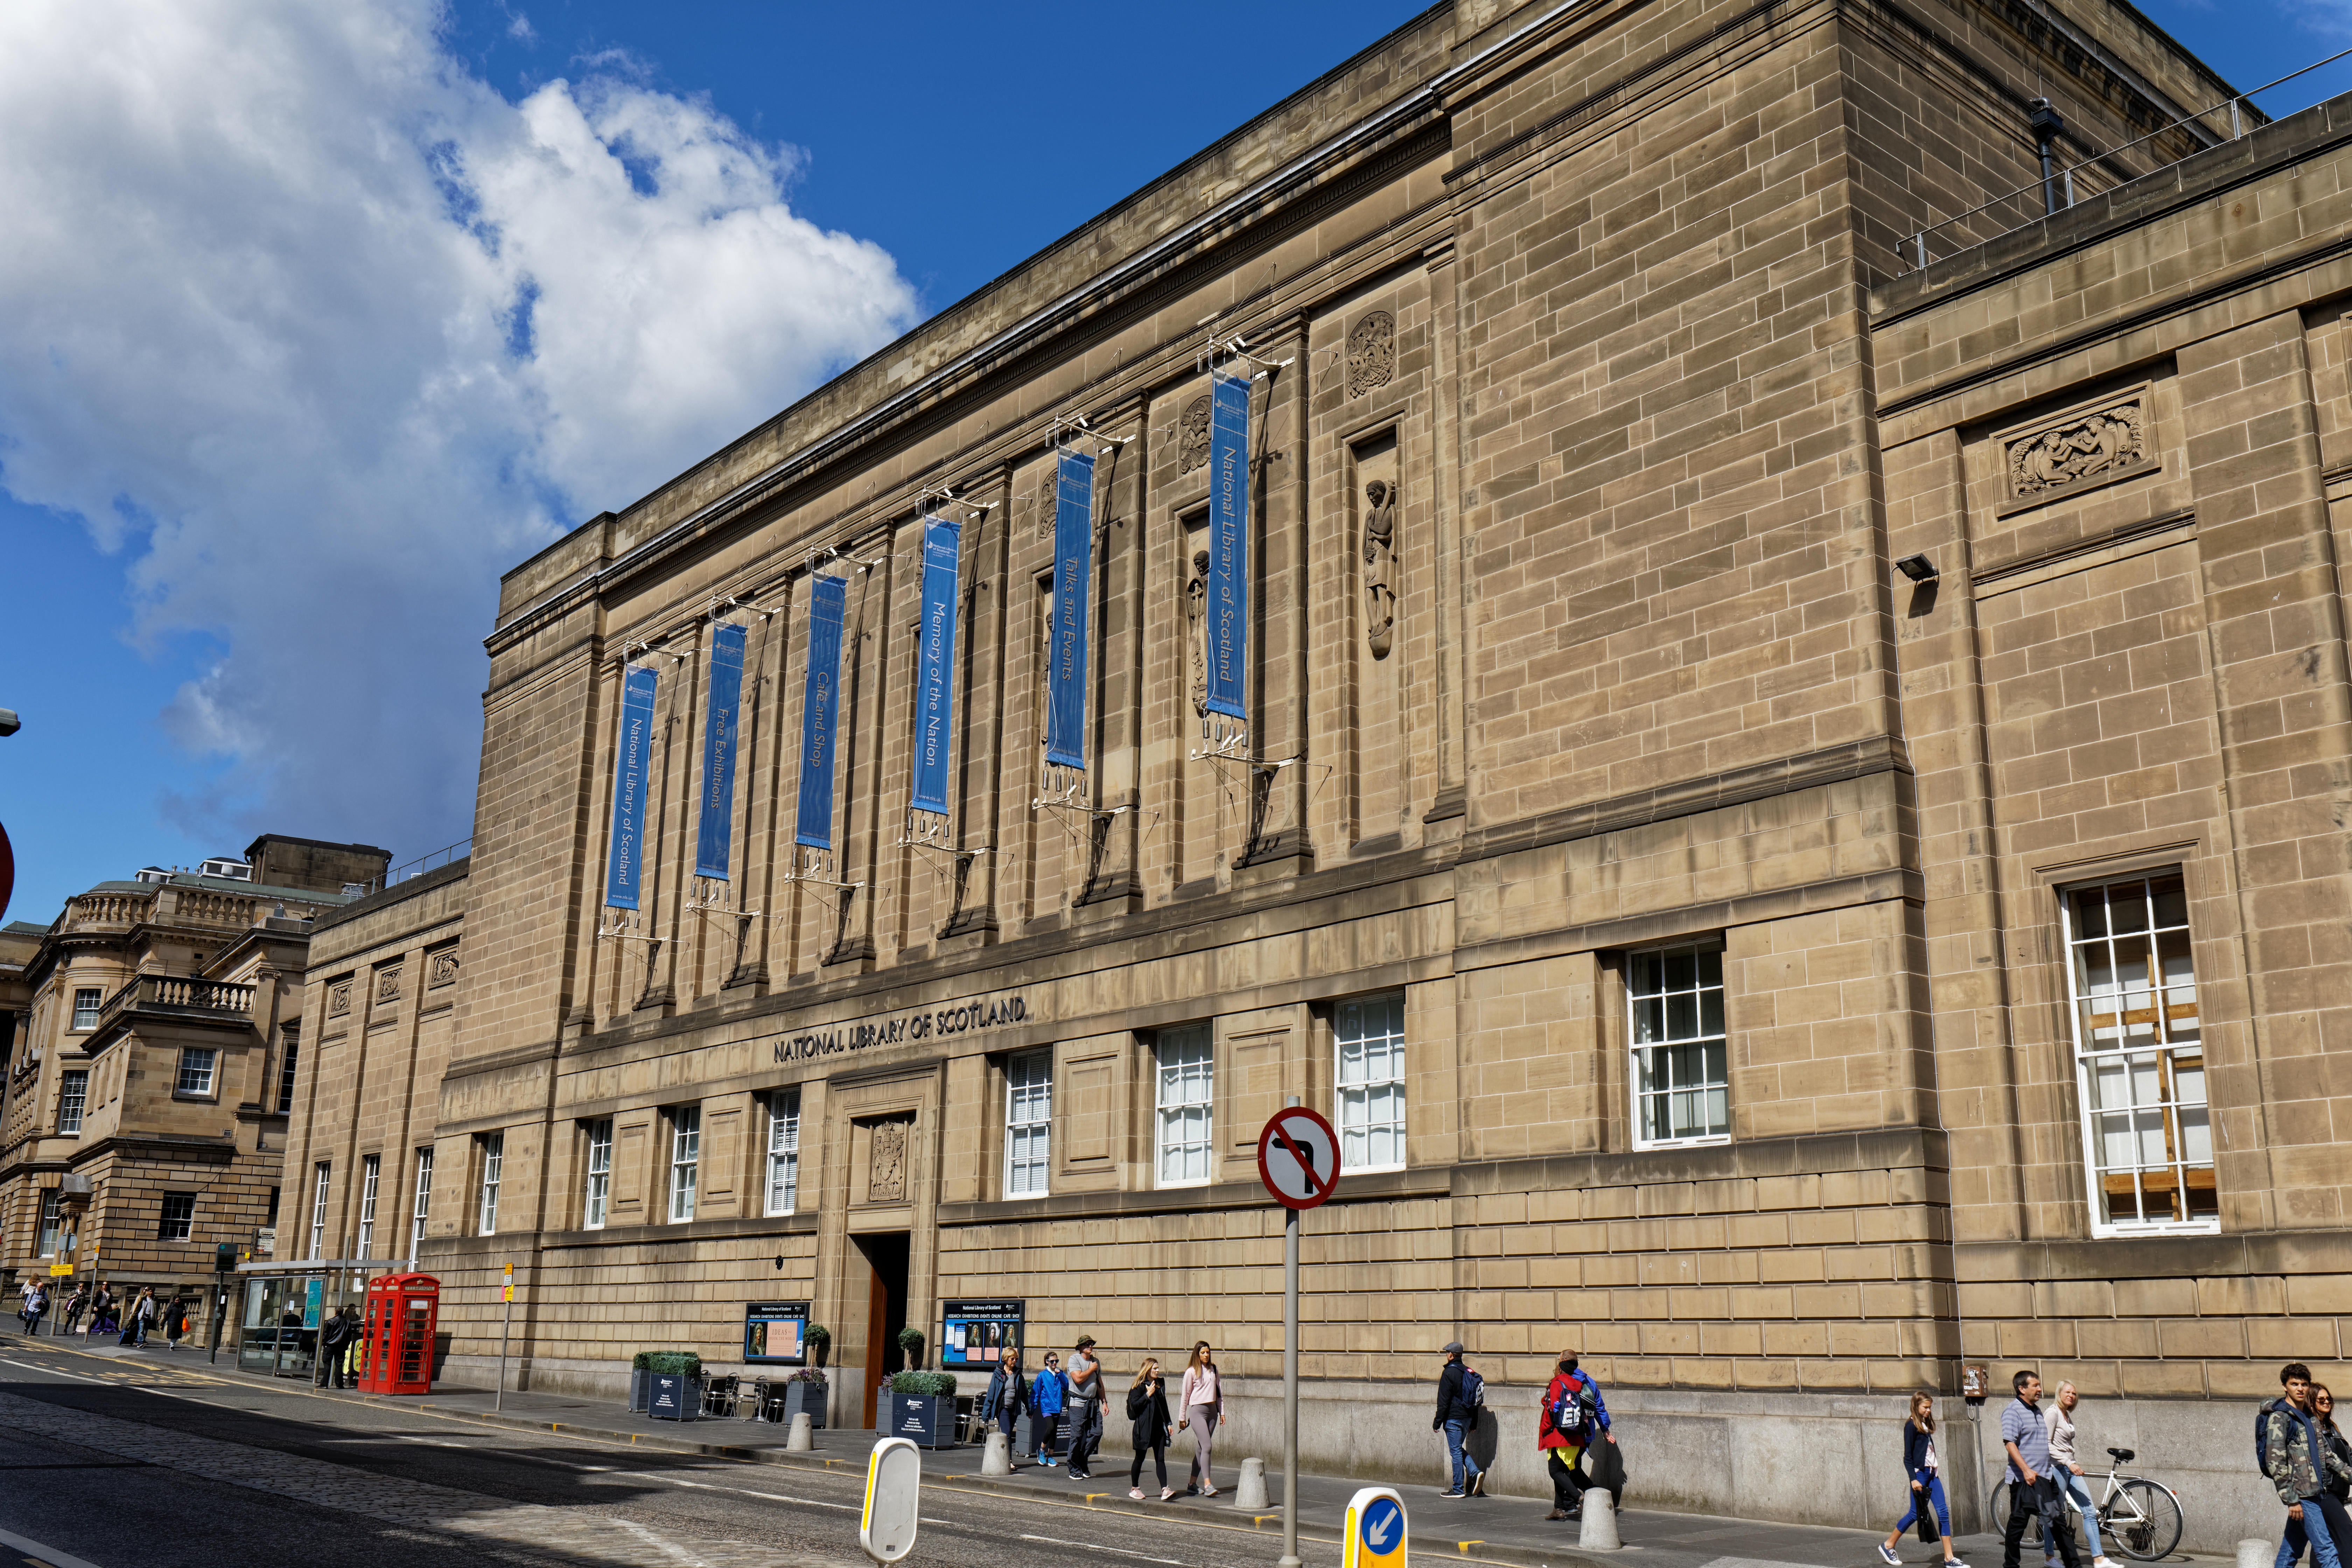 The National Library of Scotland in Edinburgh